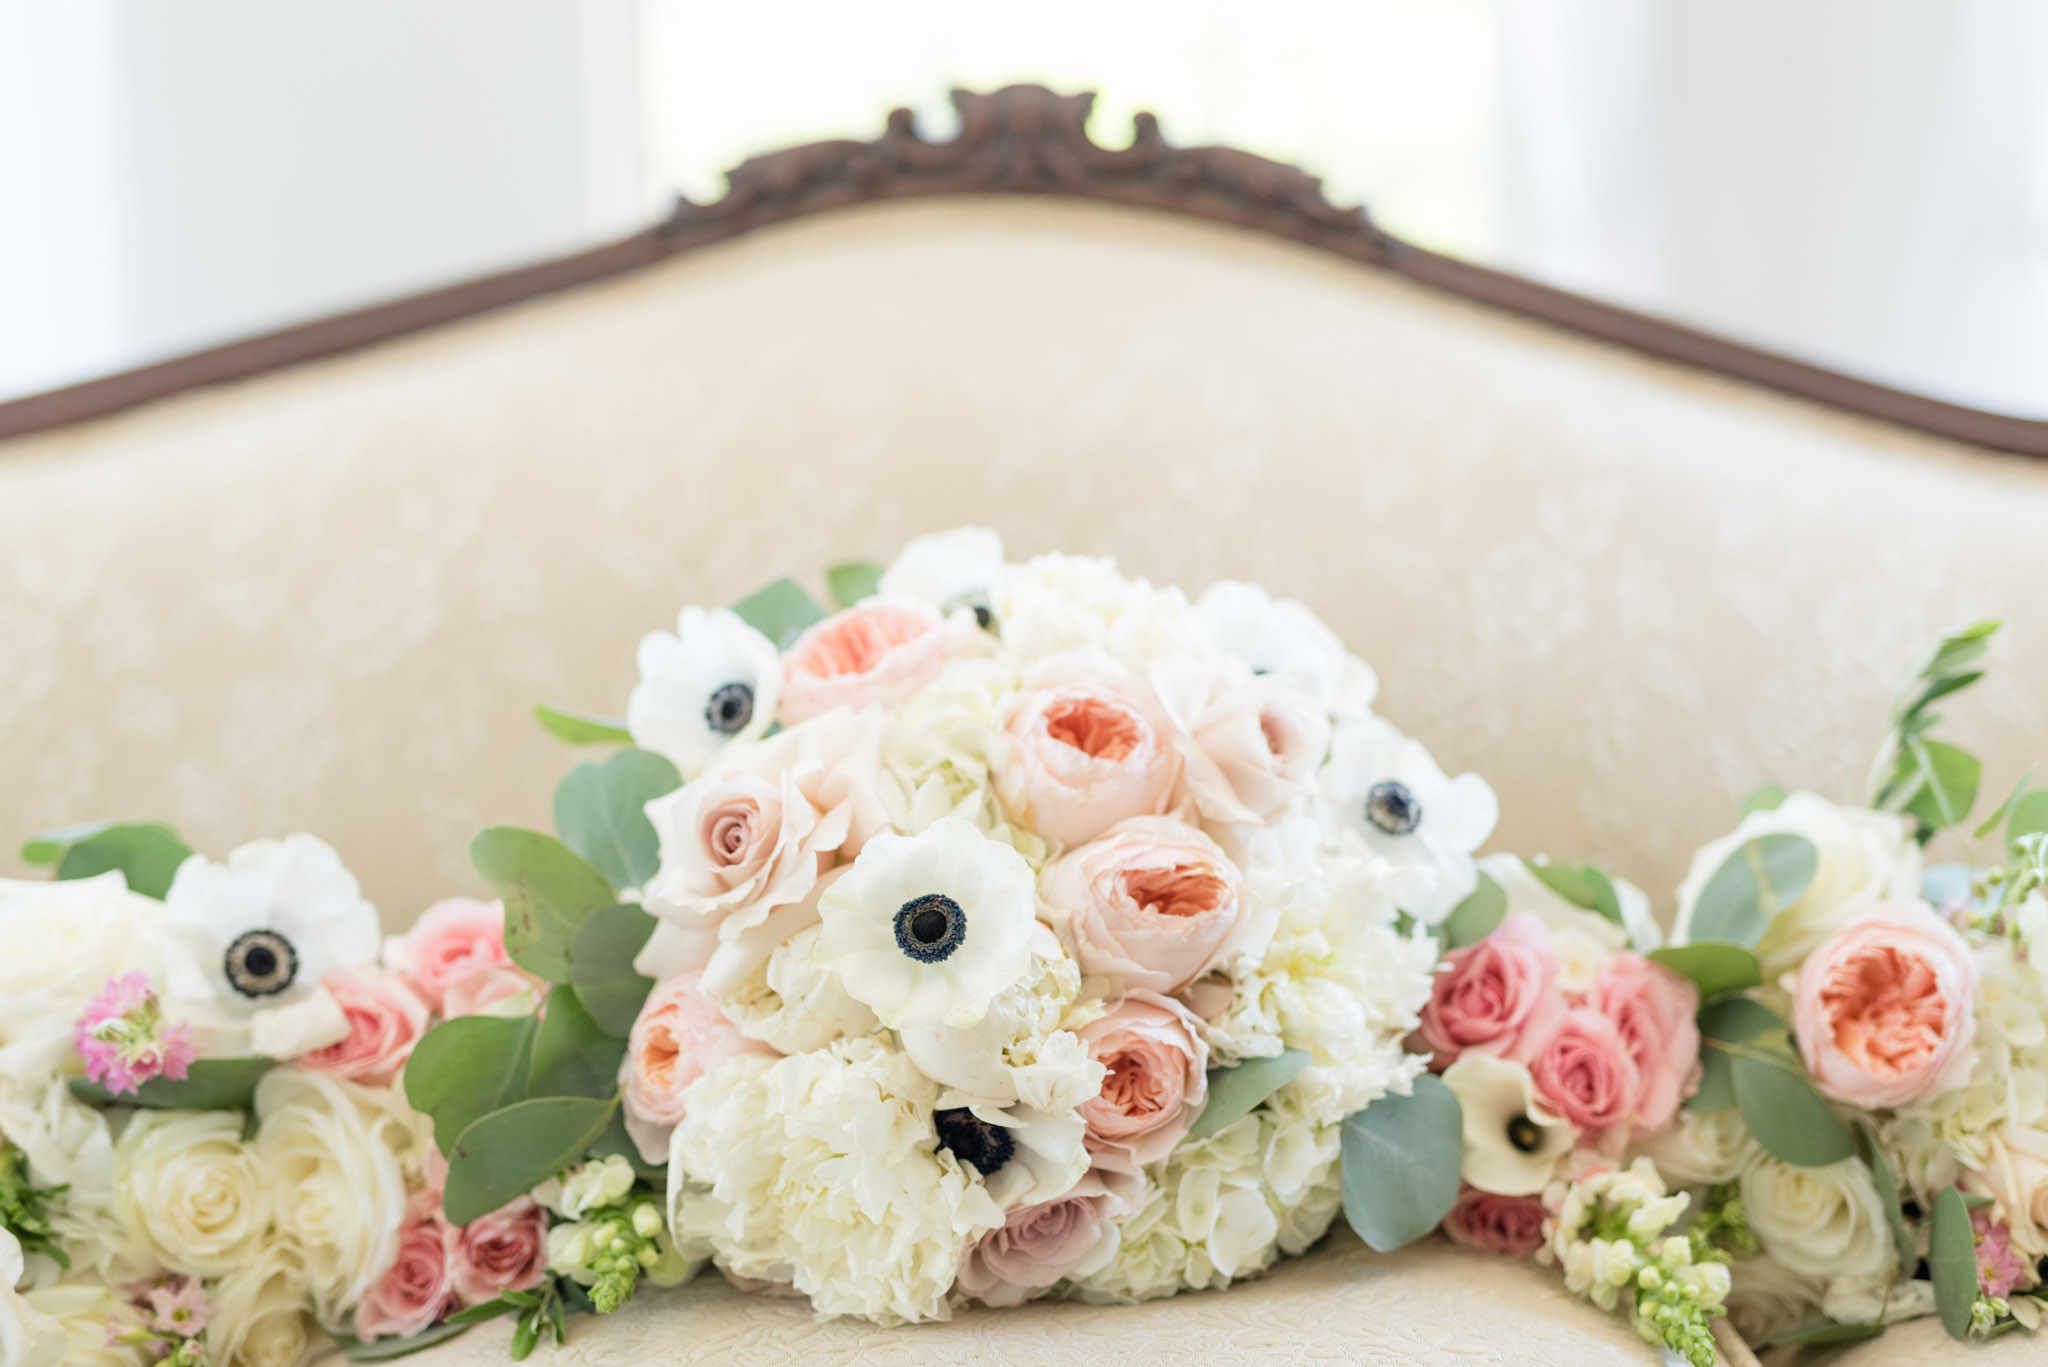 Wedding bouquets sit on couch.